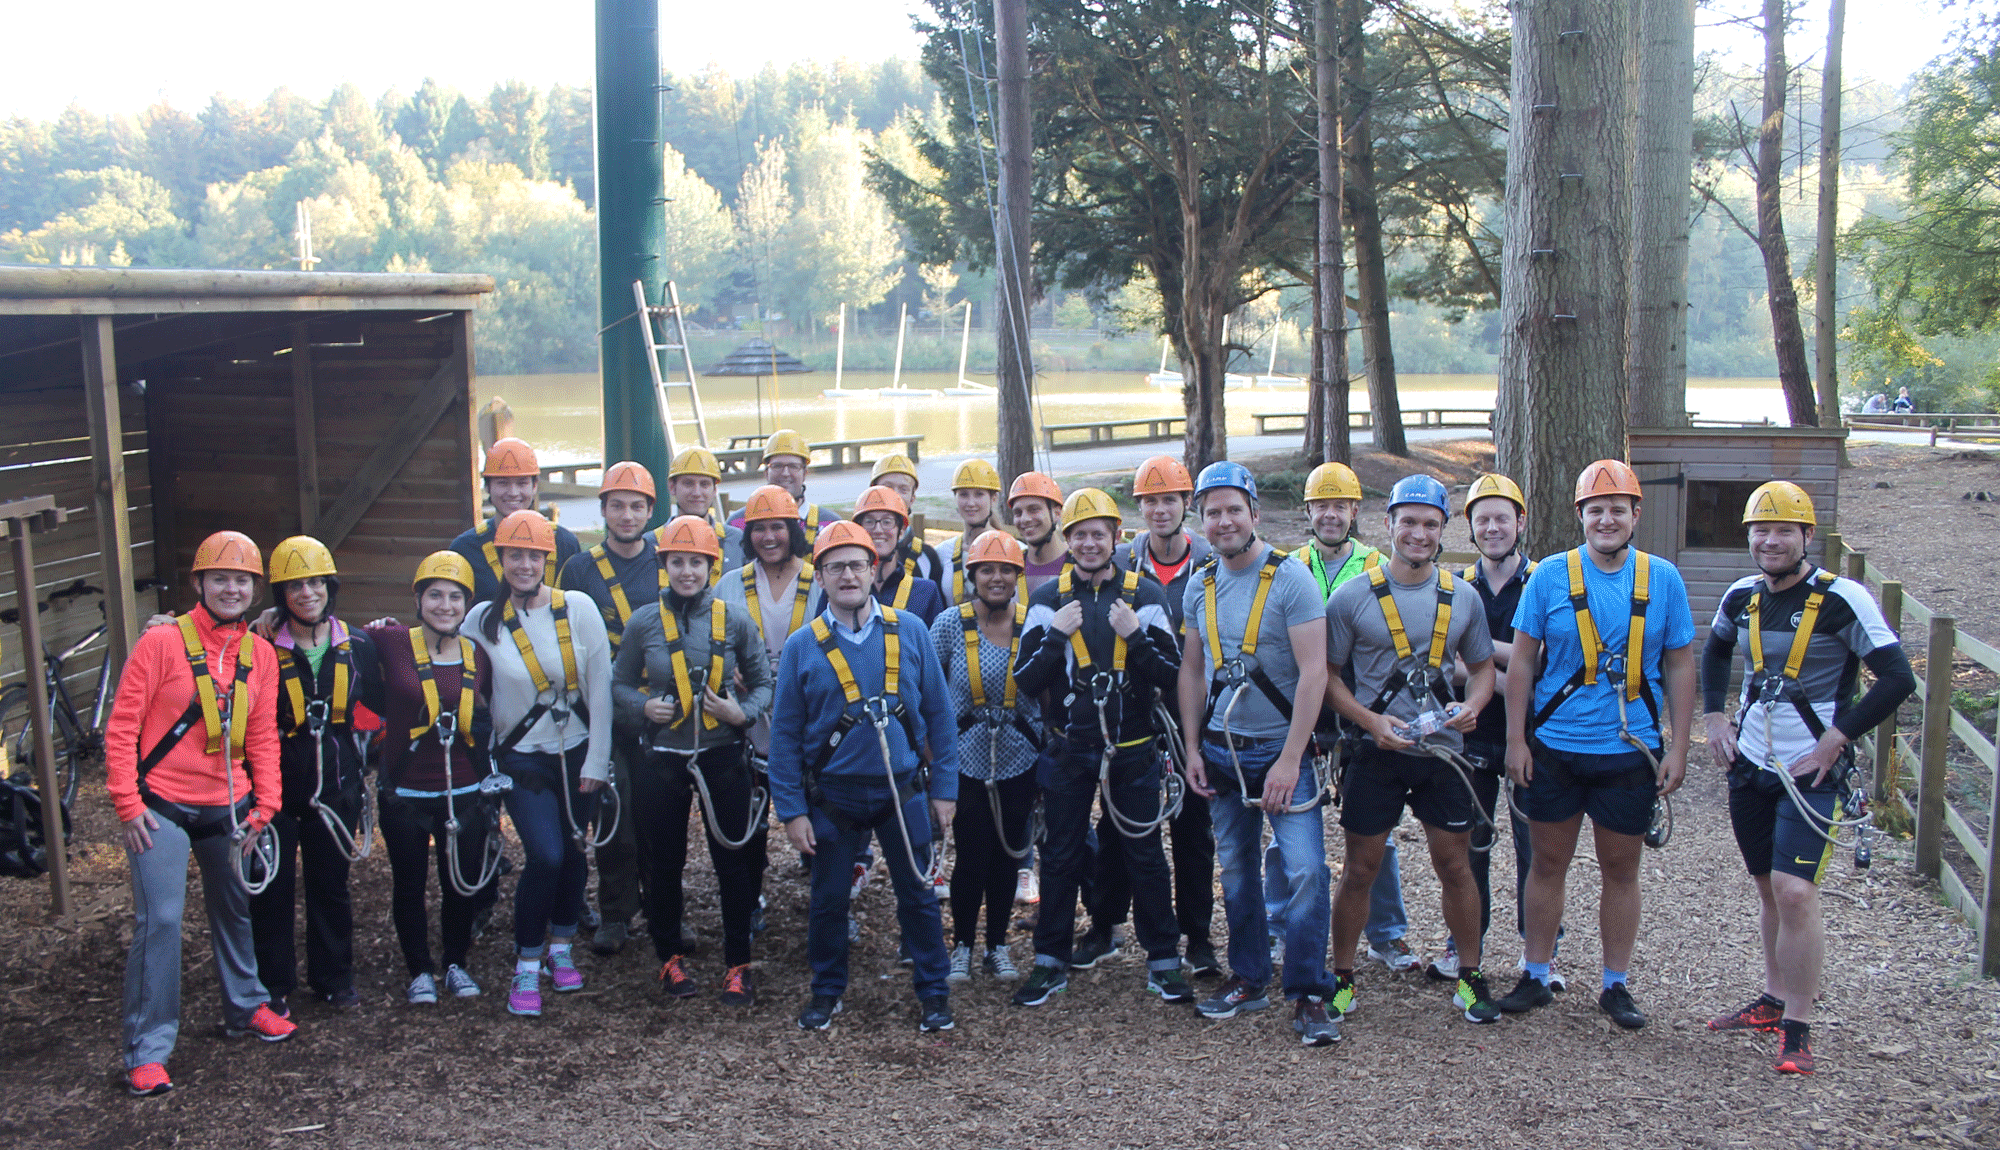 corporate teambuilding events